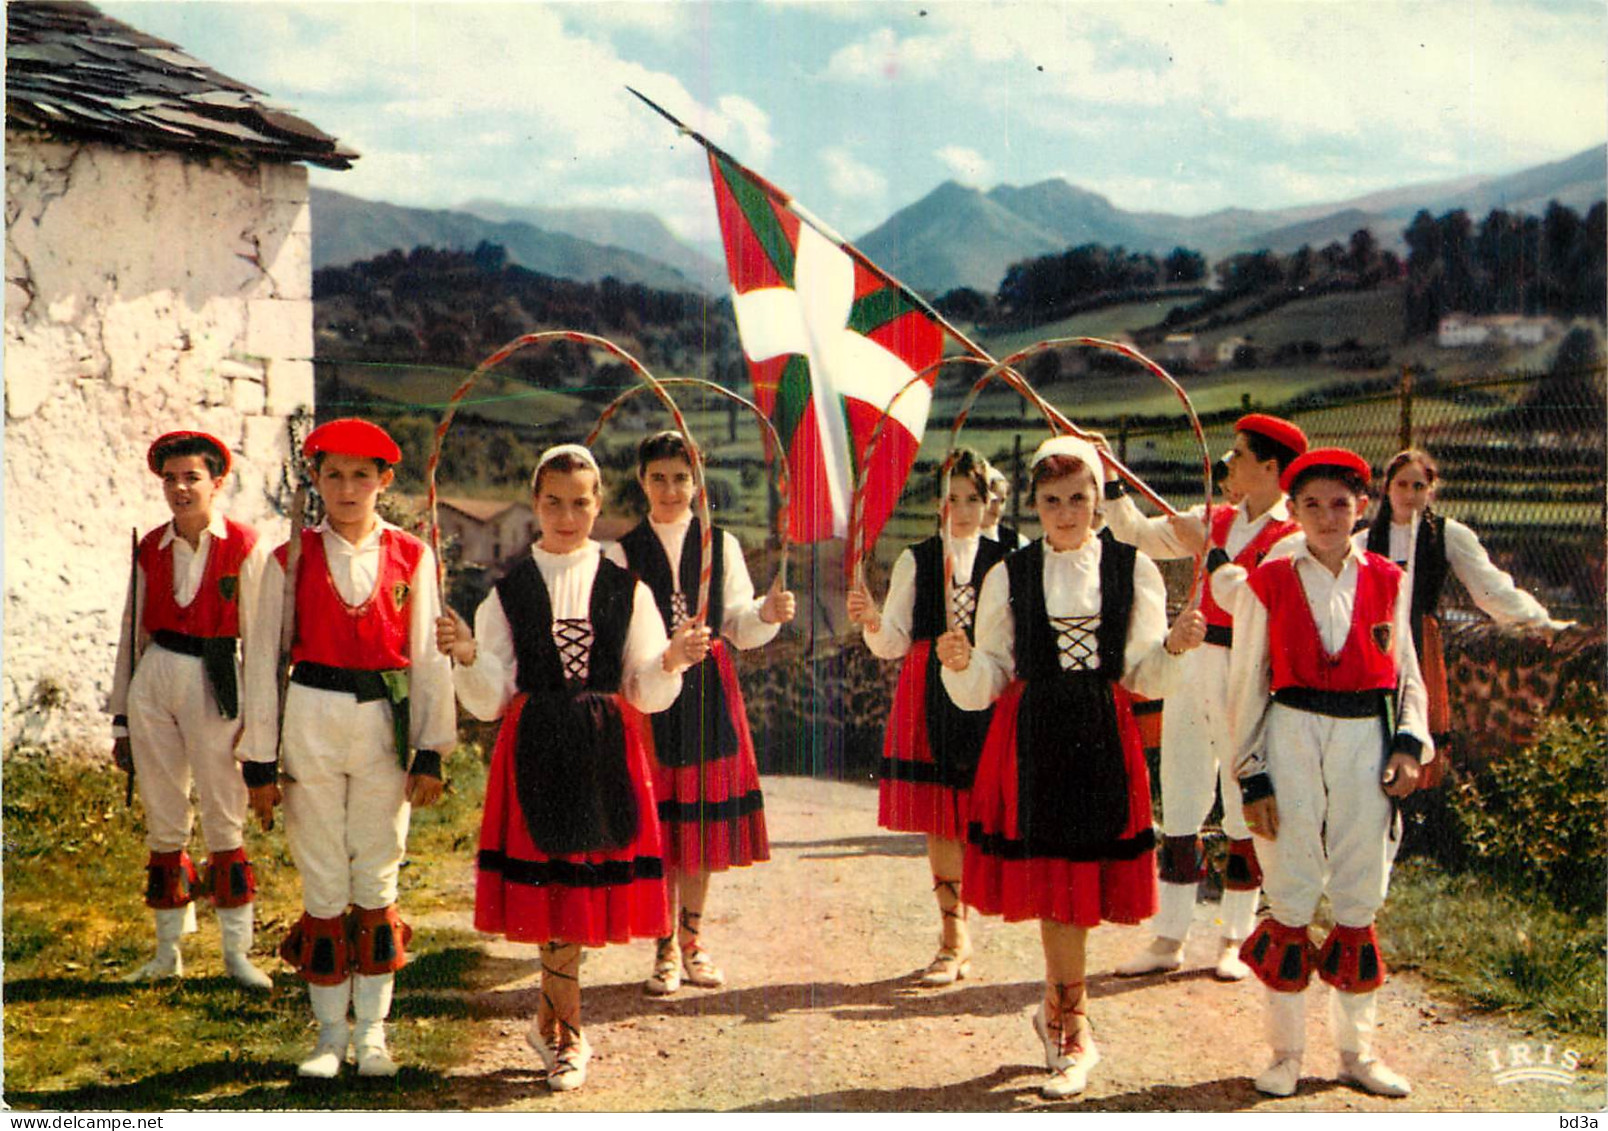 FOLKLORE PAYS BASQUE  - Bailes